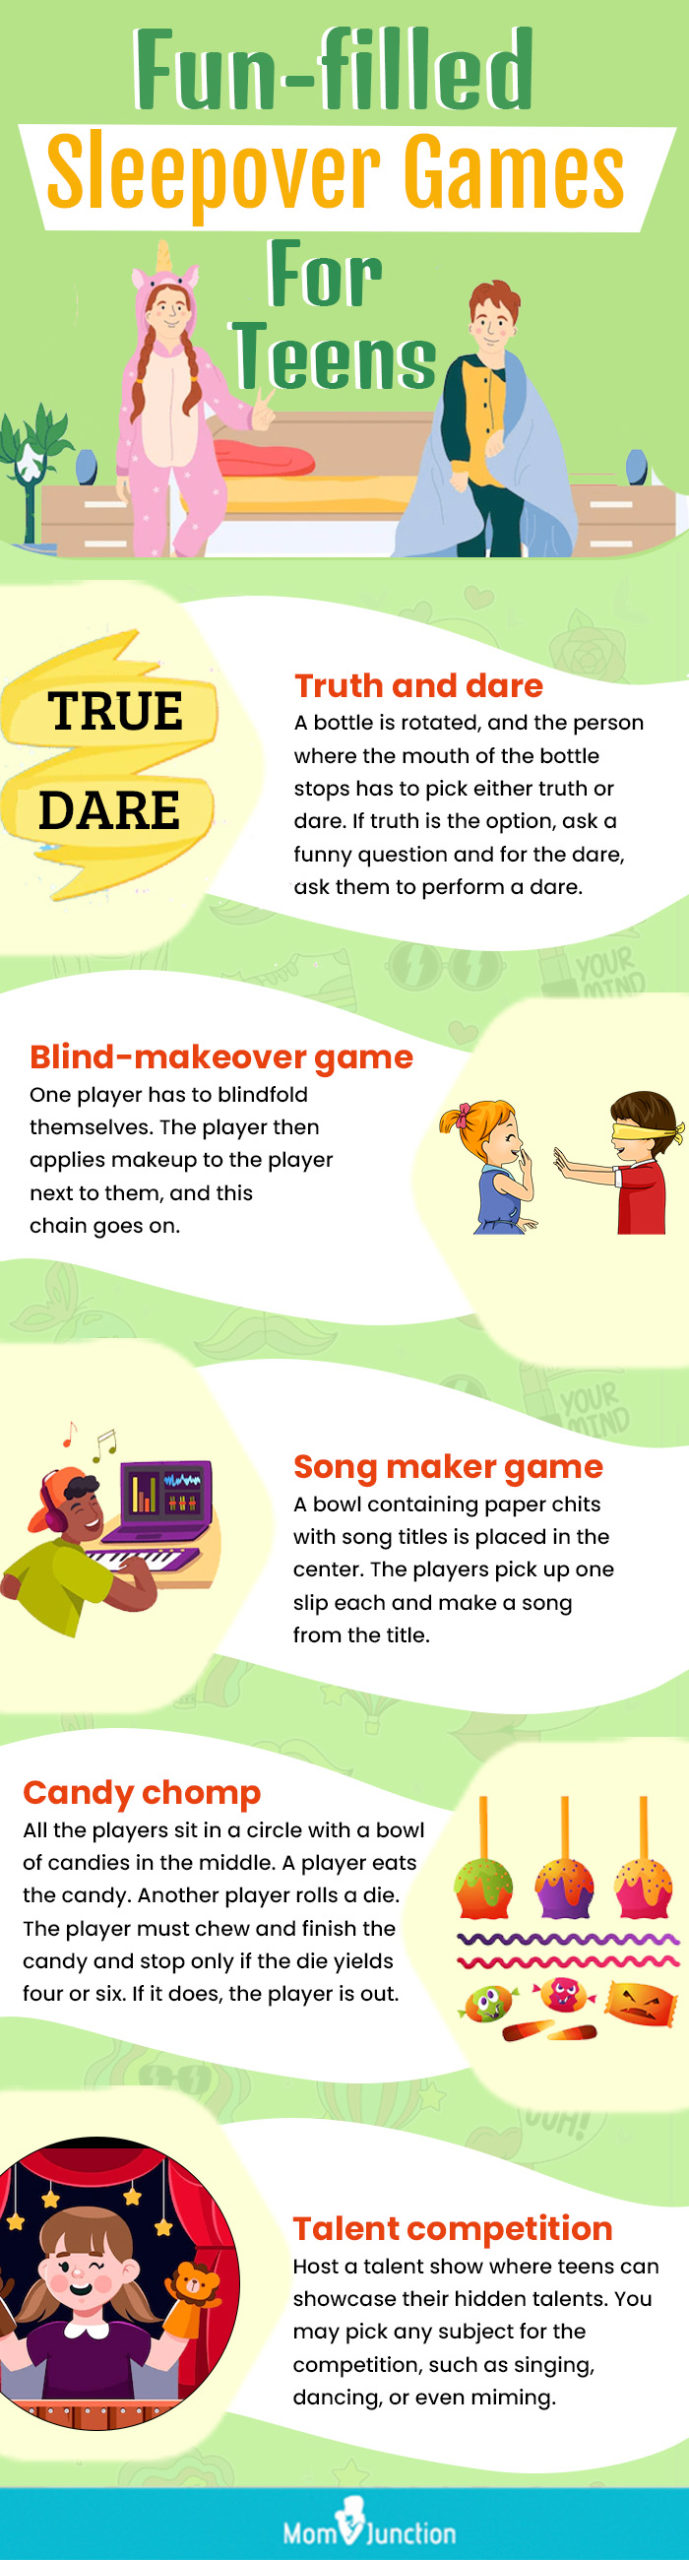 fun filled sleepover games for teens (infographic)